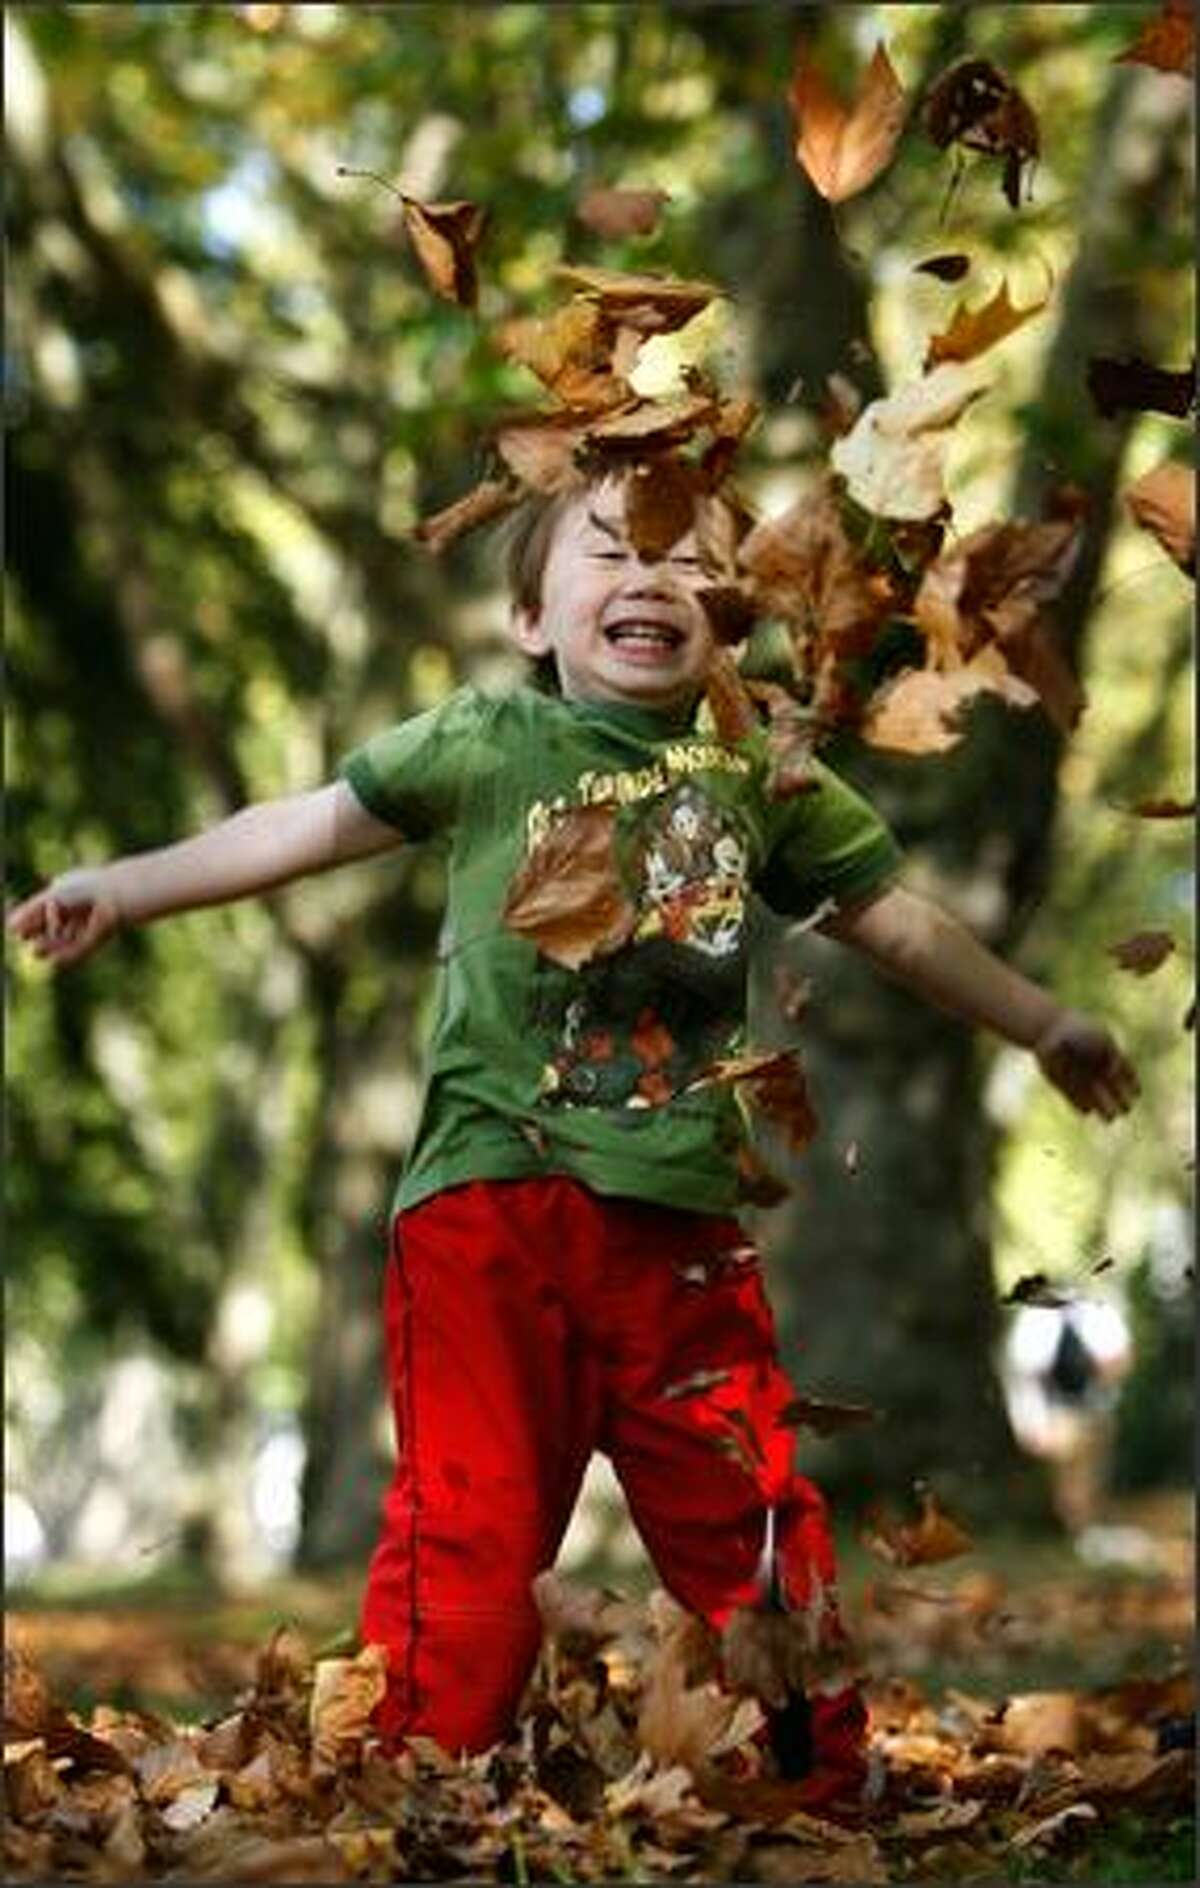 Tomoe Millette, 3 1/2, delights in tossing leaves in the air while enjoying a pleasant fall day as he plays on the University of Washington campus. Tomoe was with his mother, Yumiko Millette of Seattle, who was between classes Monday.